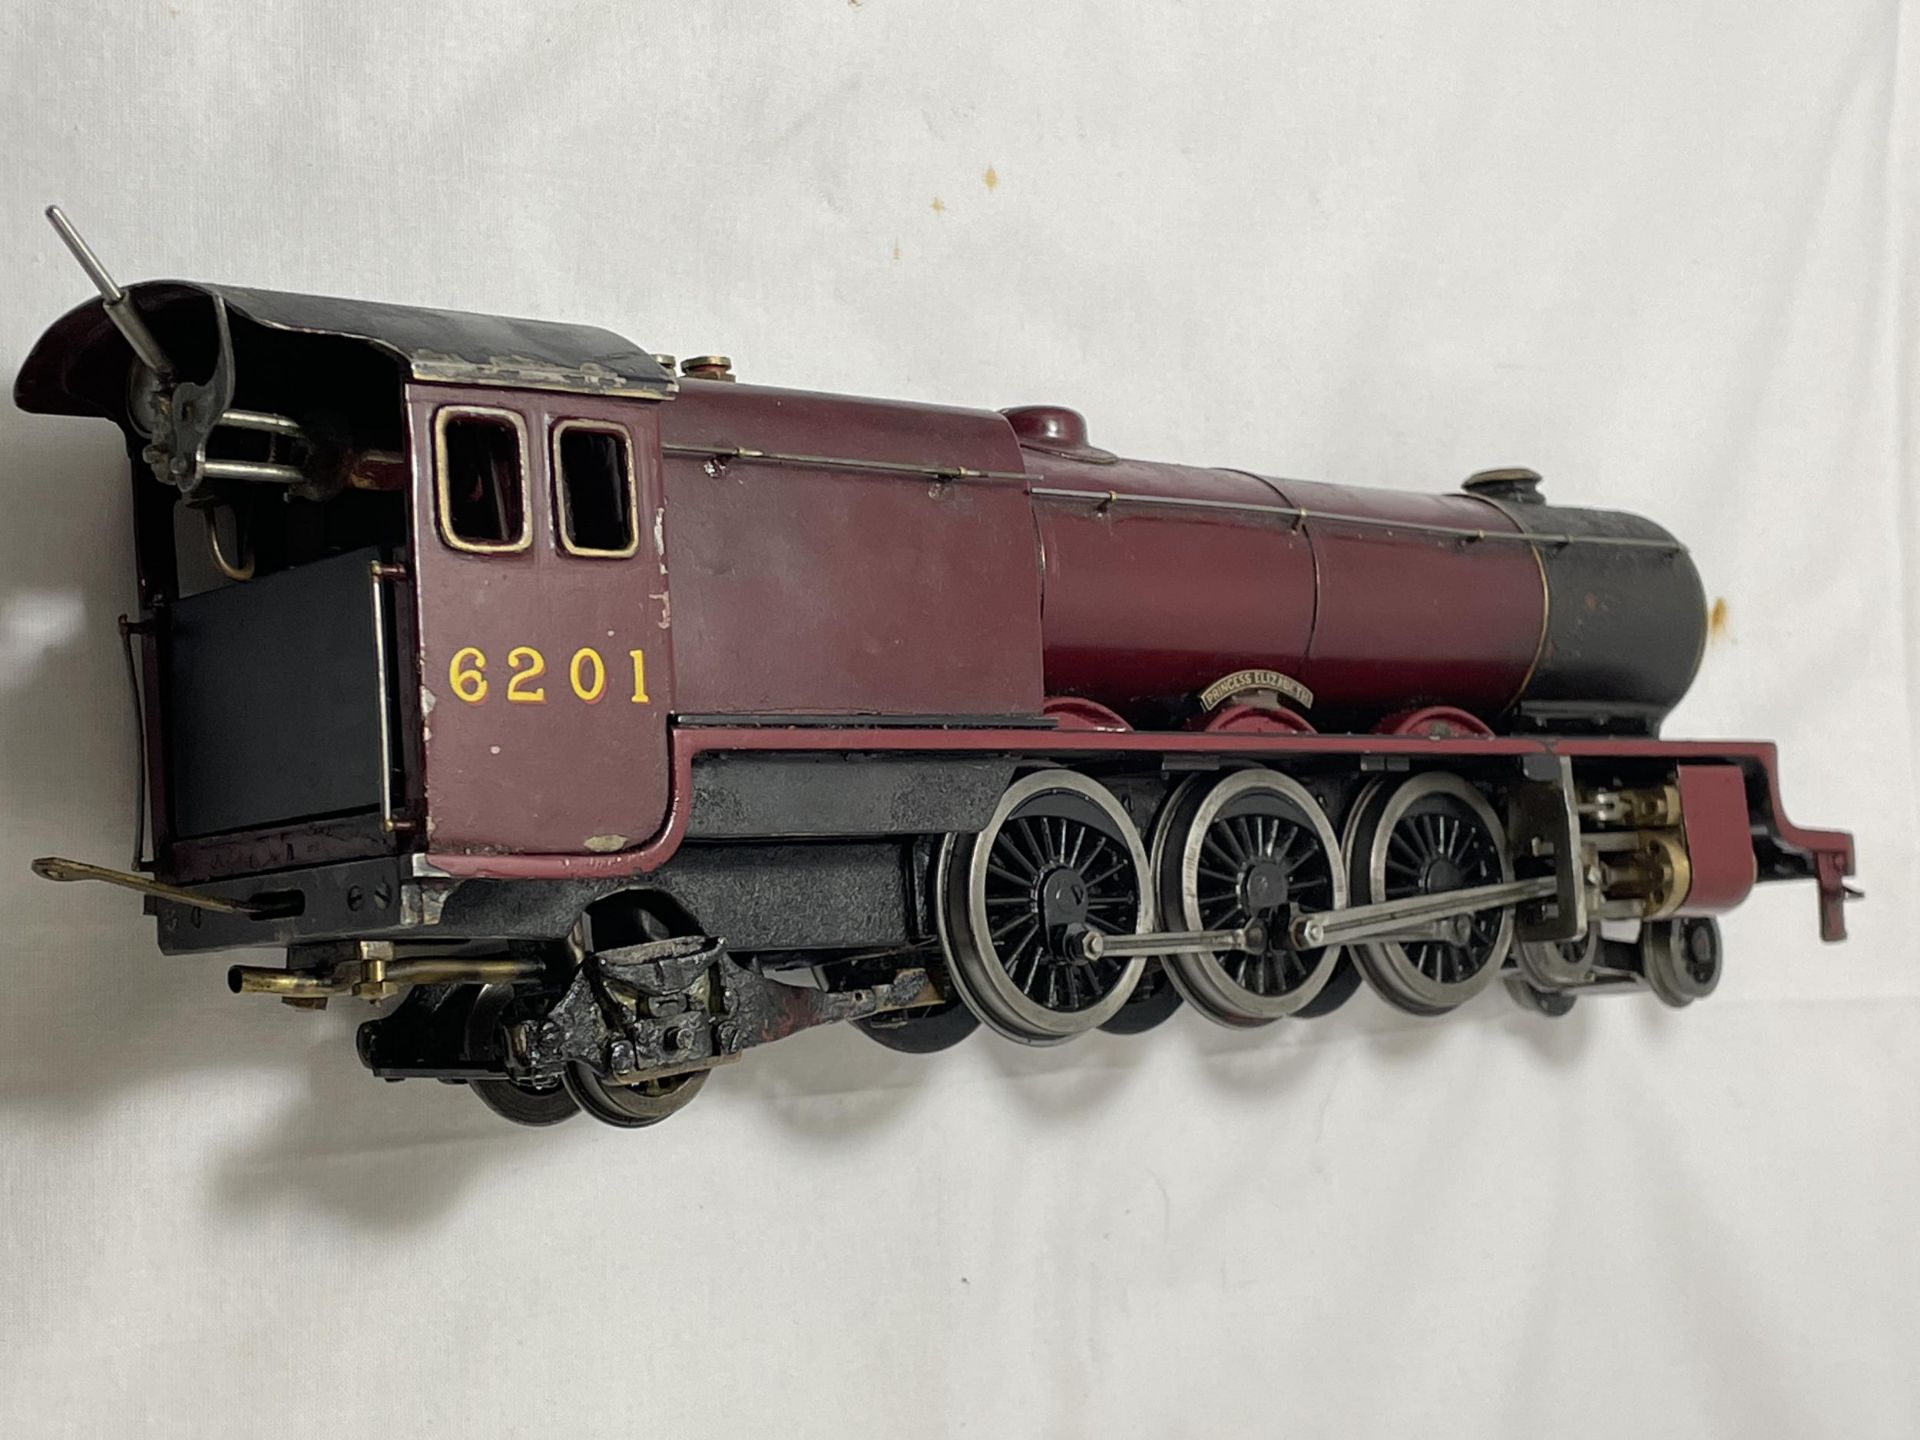 A SCRATCH BUILT LIVE STEAM 30 MM GAUGE 4-6-2 MODEL RAILWAY LOCOMOTIVE NUMBER 6201 IN MAROON AND - Image 2 of 5